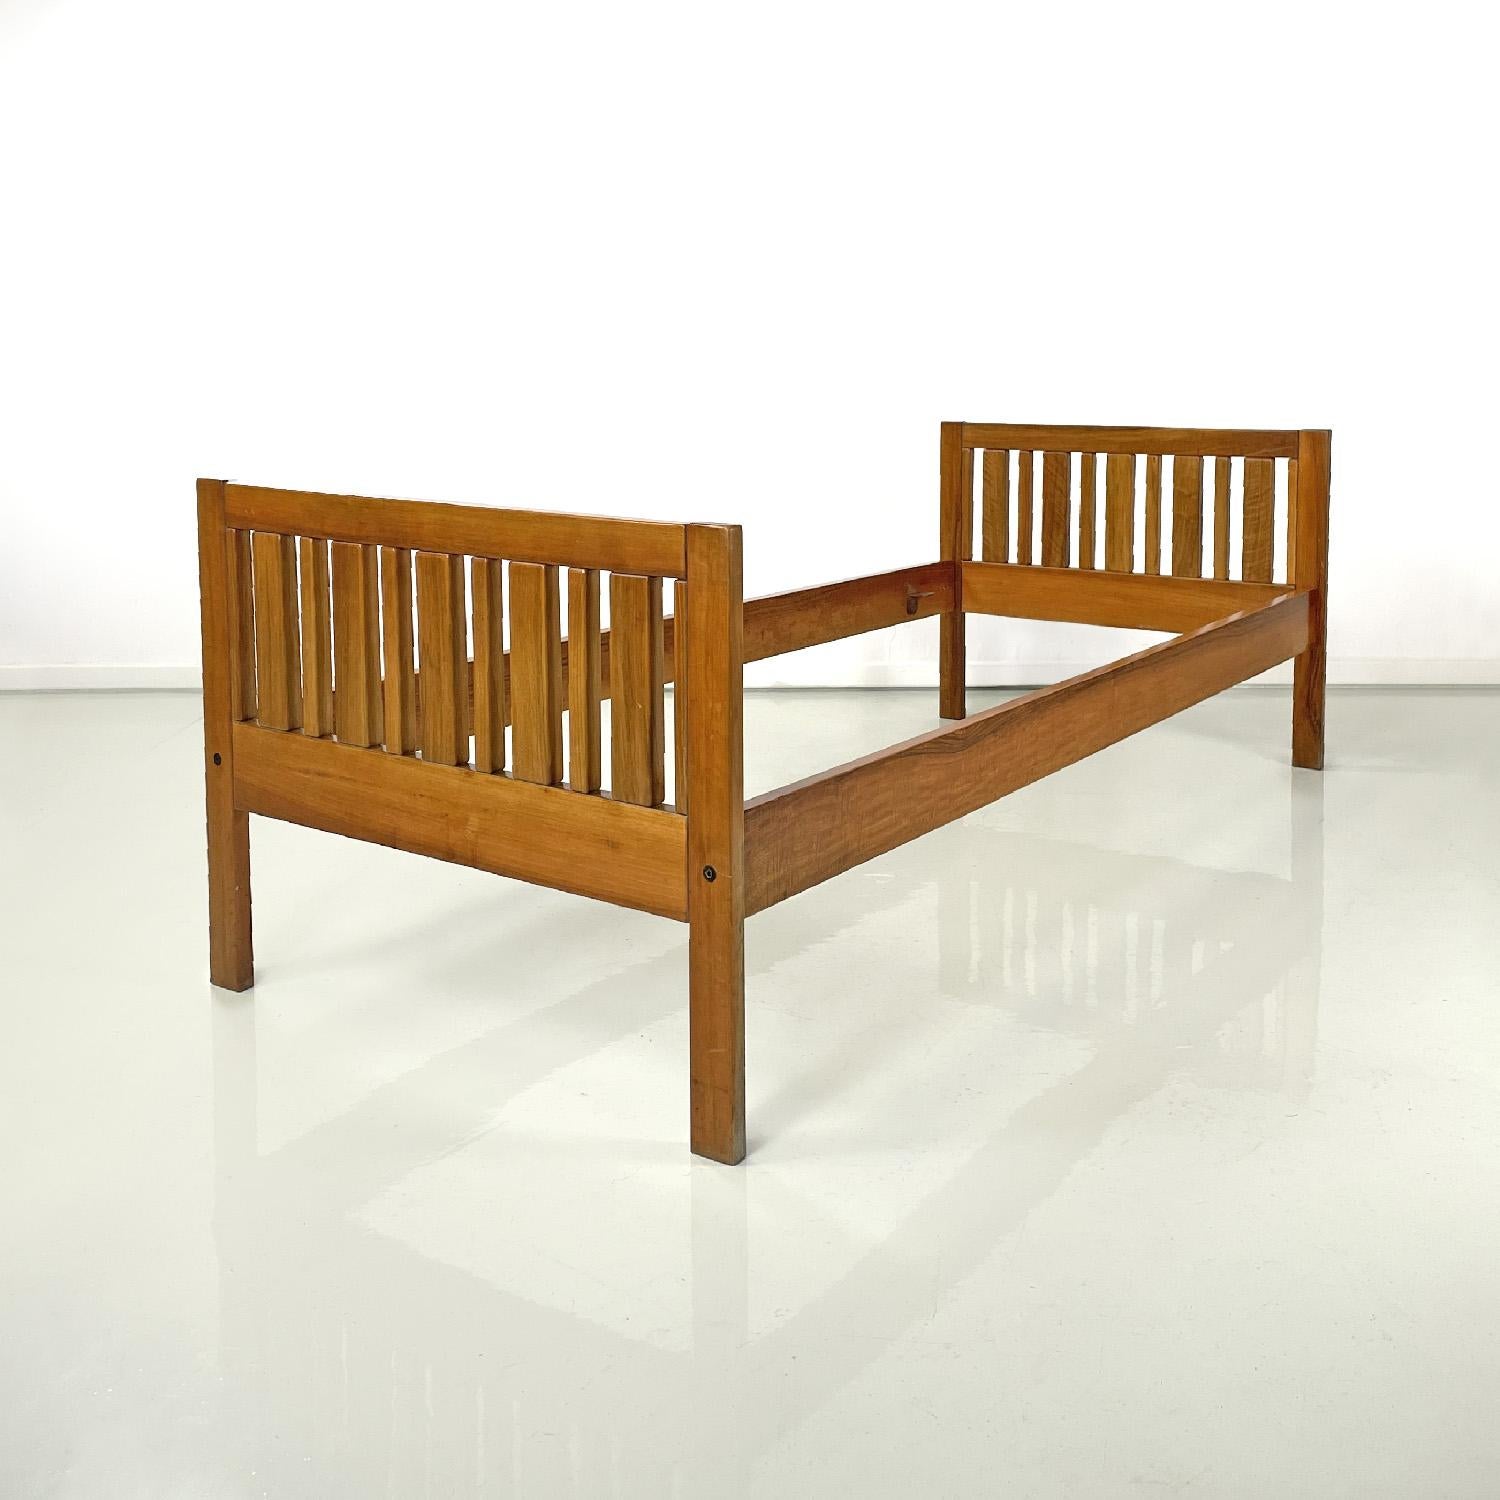 Italian mid-century modern bed by Ettore Sottsass for Poltronova, 1960s
Single bed or daybed entirely made of wood. The structures of the headboard and back are made up of rectangular section slats of various sizes.
Designed by Ettore Sottsass for